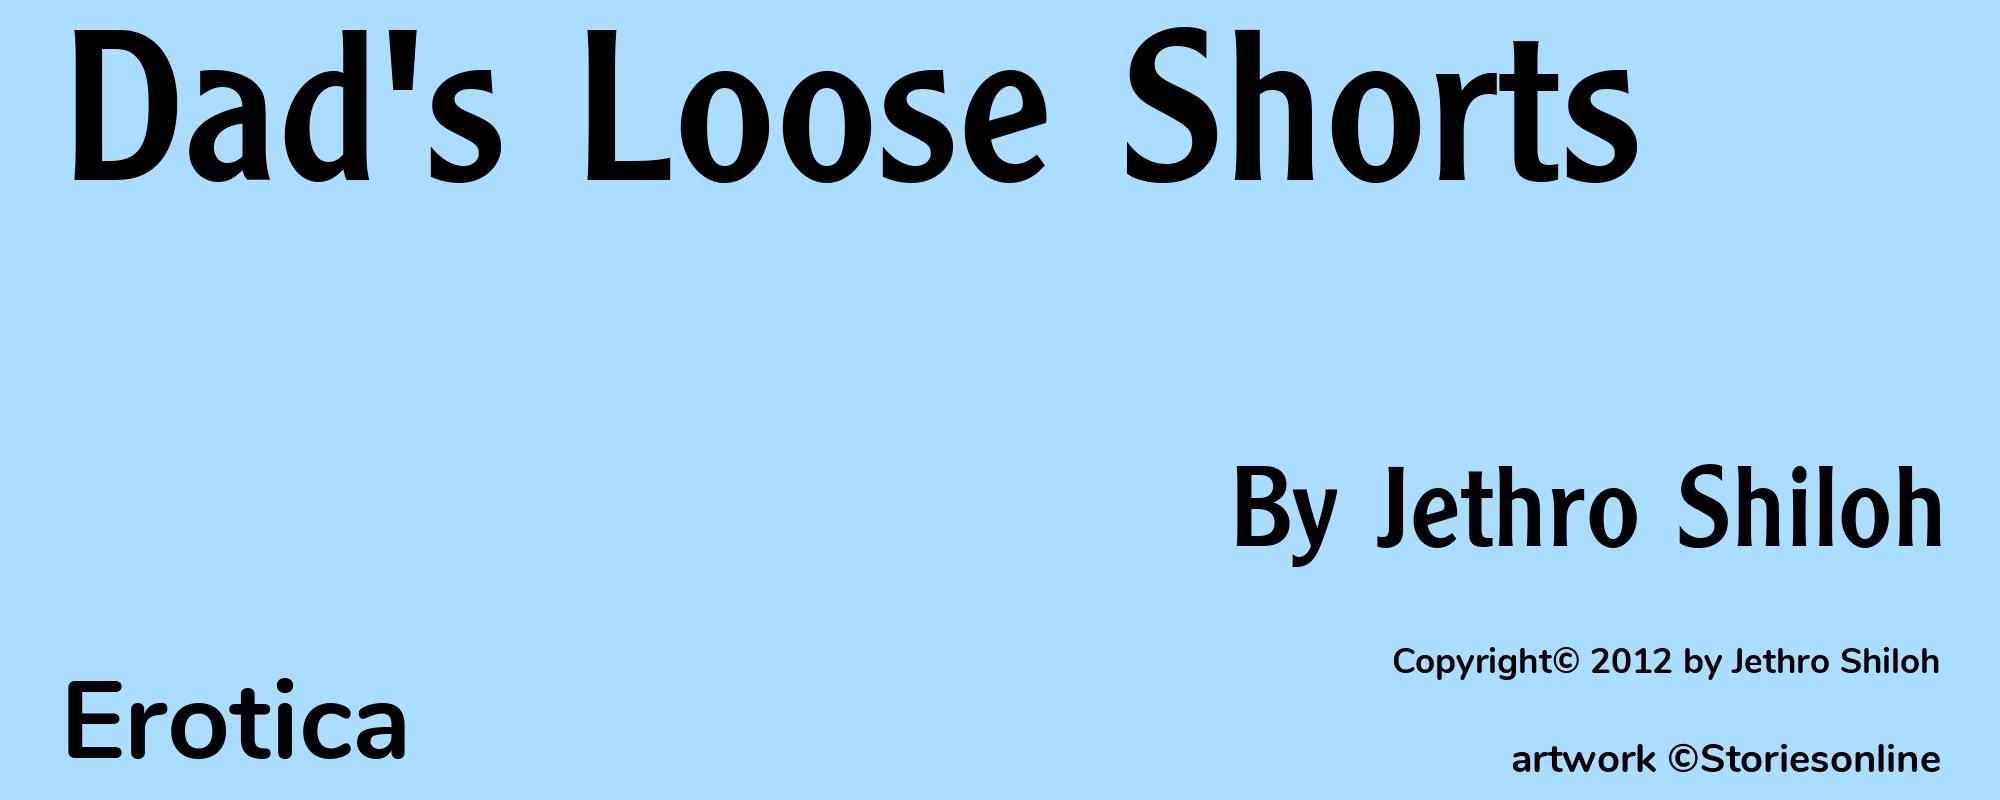 Dad's Loose Shorts - Cover